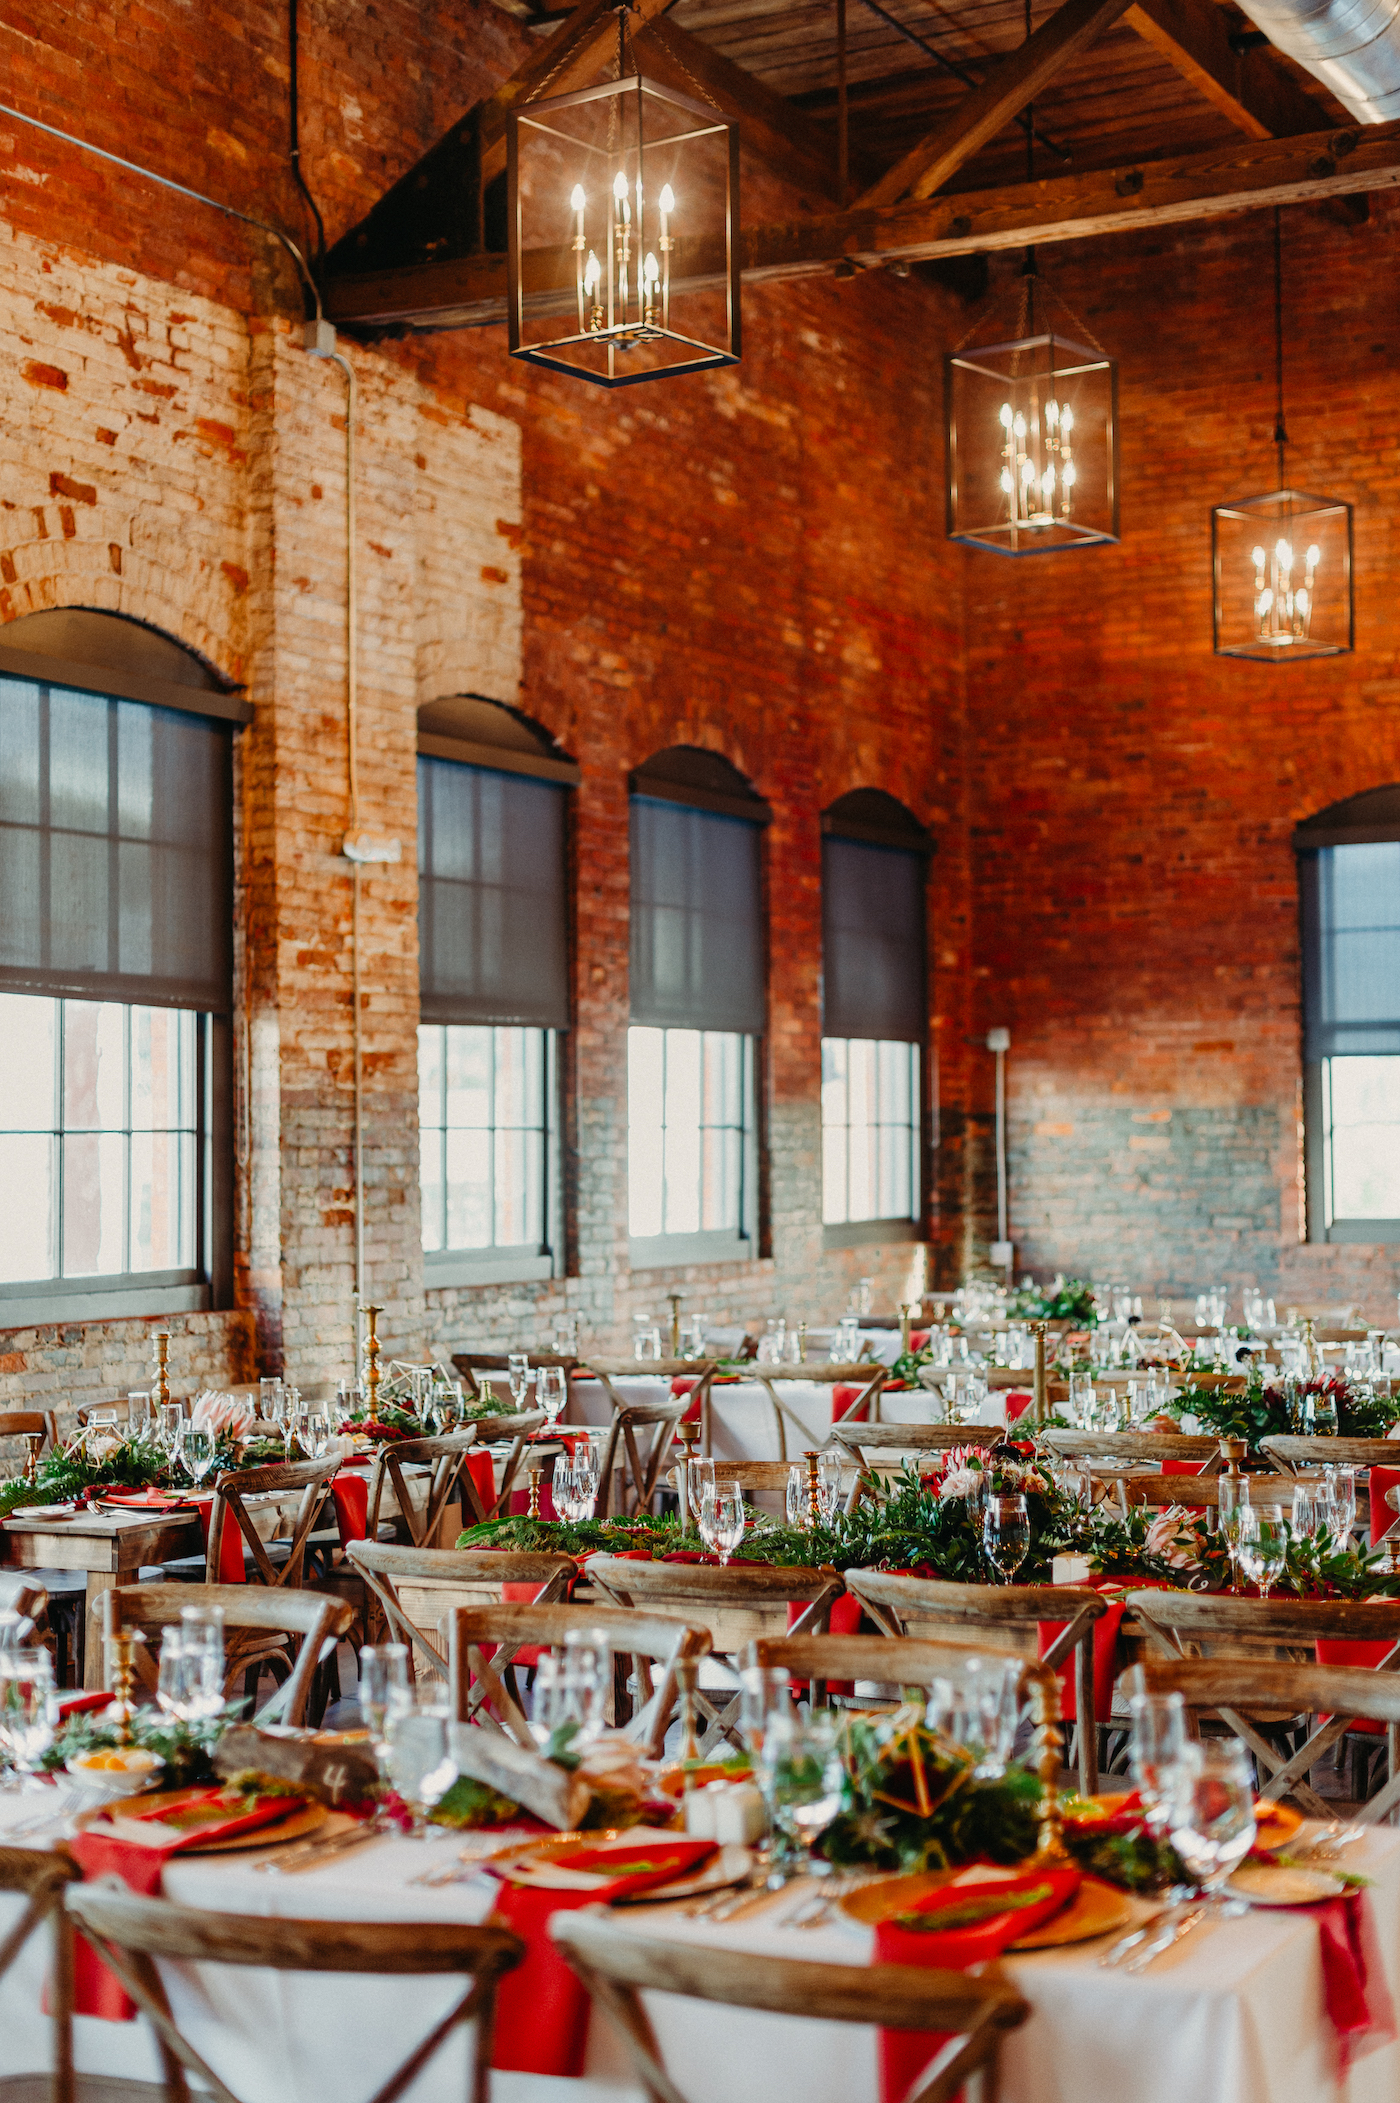 Tampa Wedding Reception at Historic Building Armature Works with Brick Walls and Industrial Chic Chandeliers | Long Feasting Tables with Wood Cross Back Chairs and Greenery Garland Runners with Burgundy Maroon Red Napkins